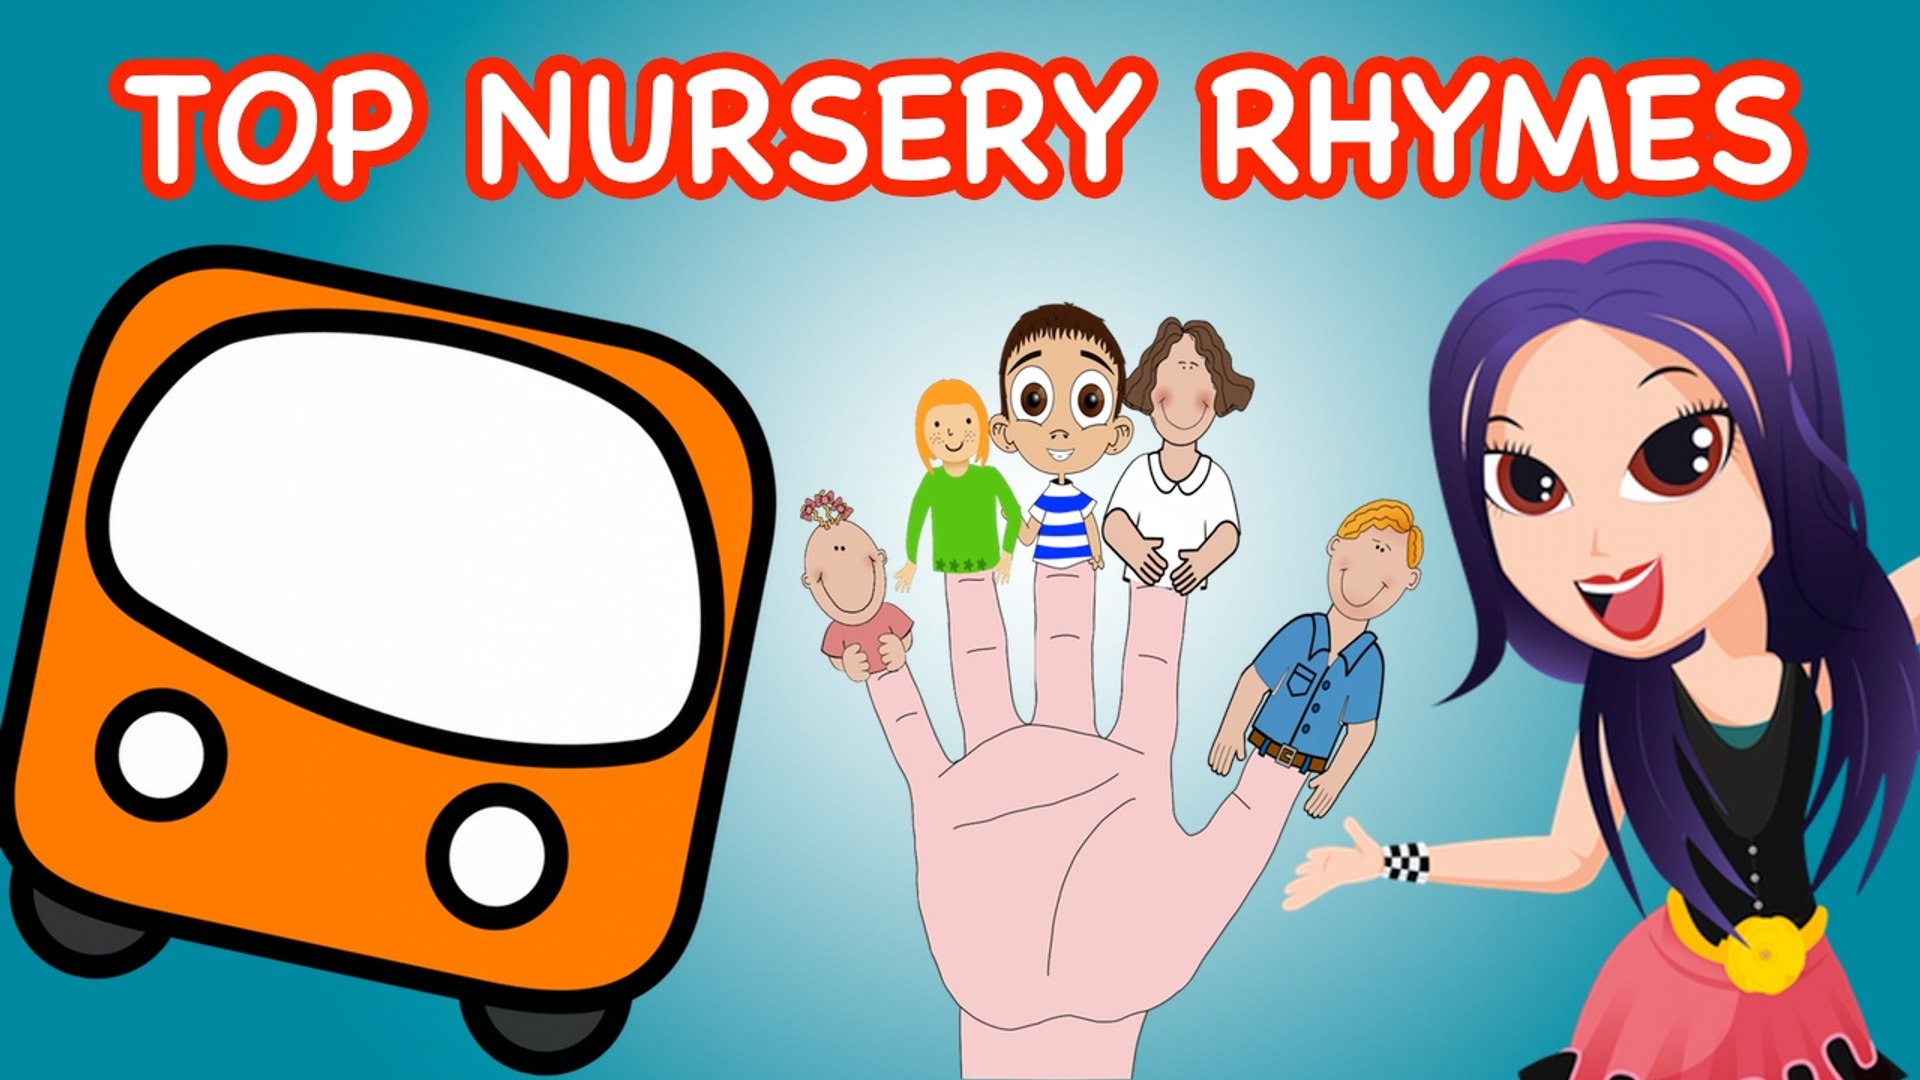 Nursery Rhymes Playlist   Collection of Popular Nursery Rhyme Songs for  Children